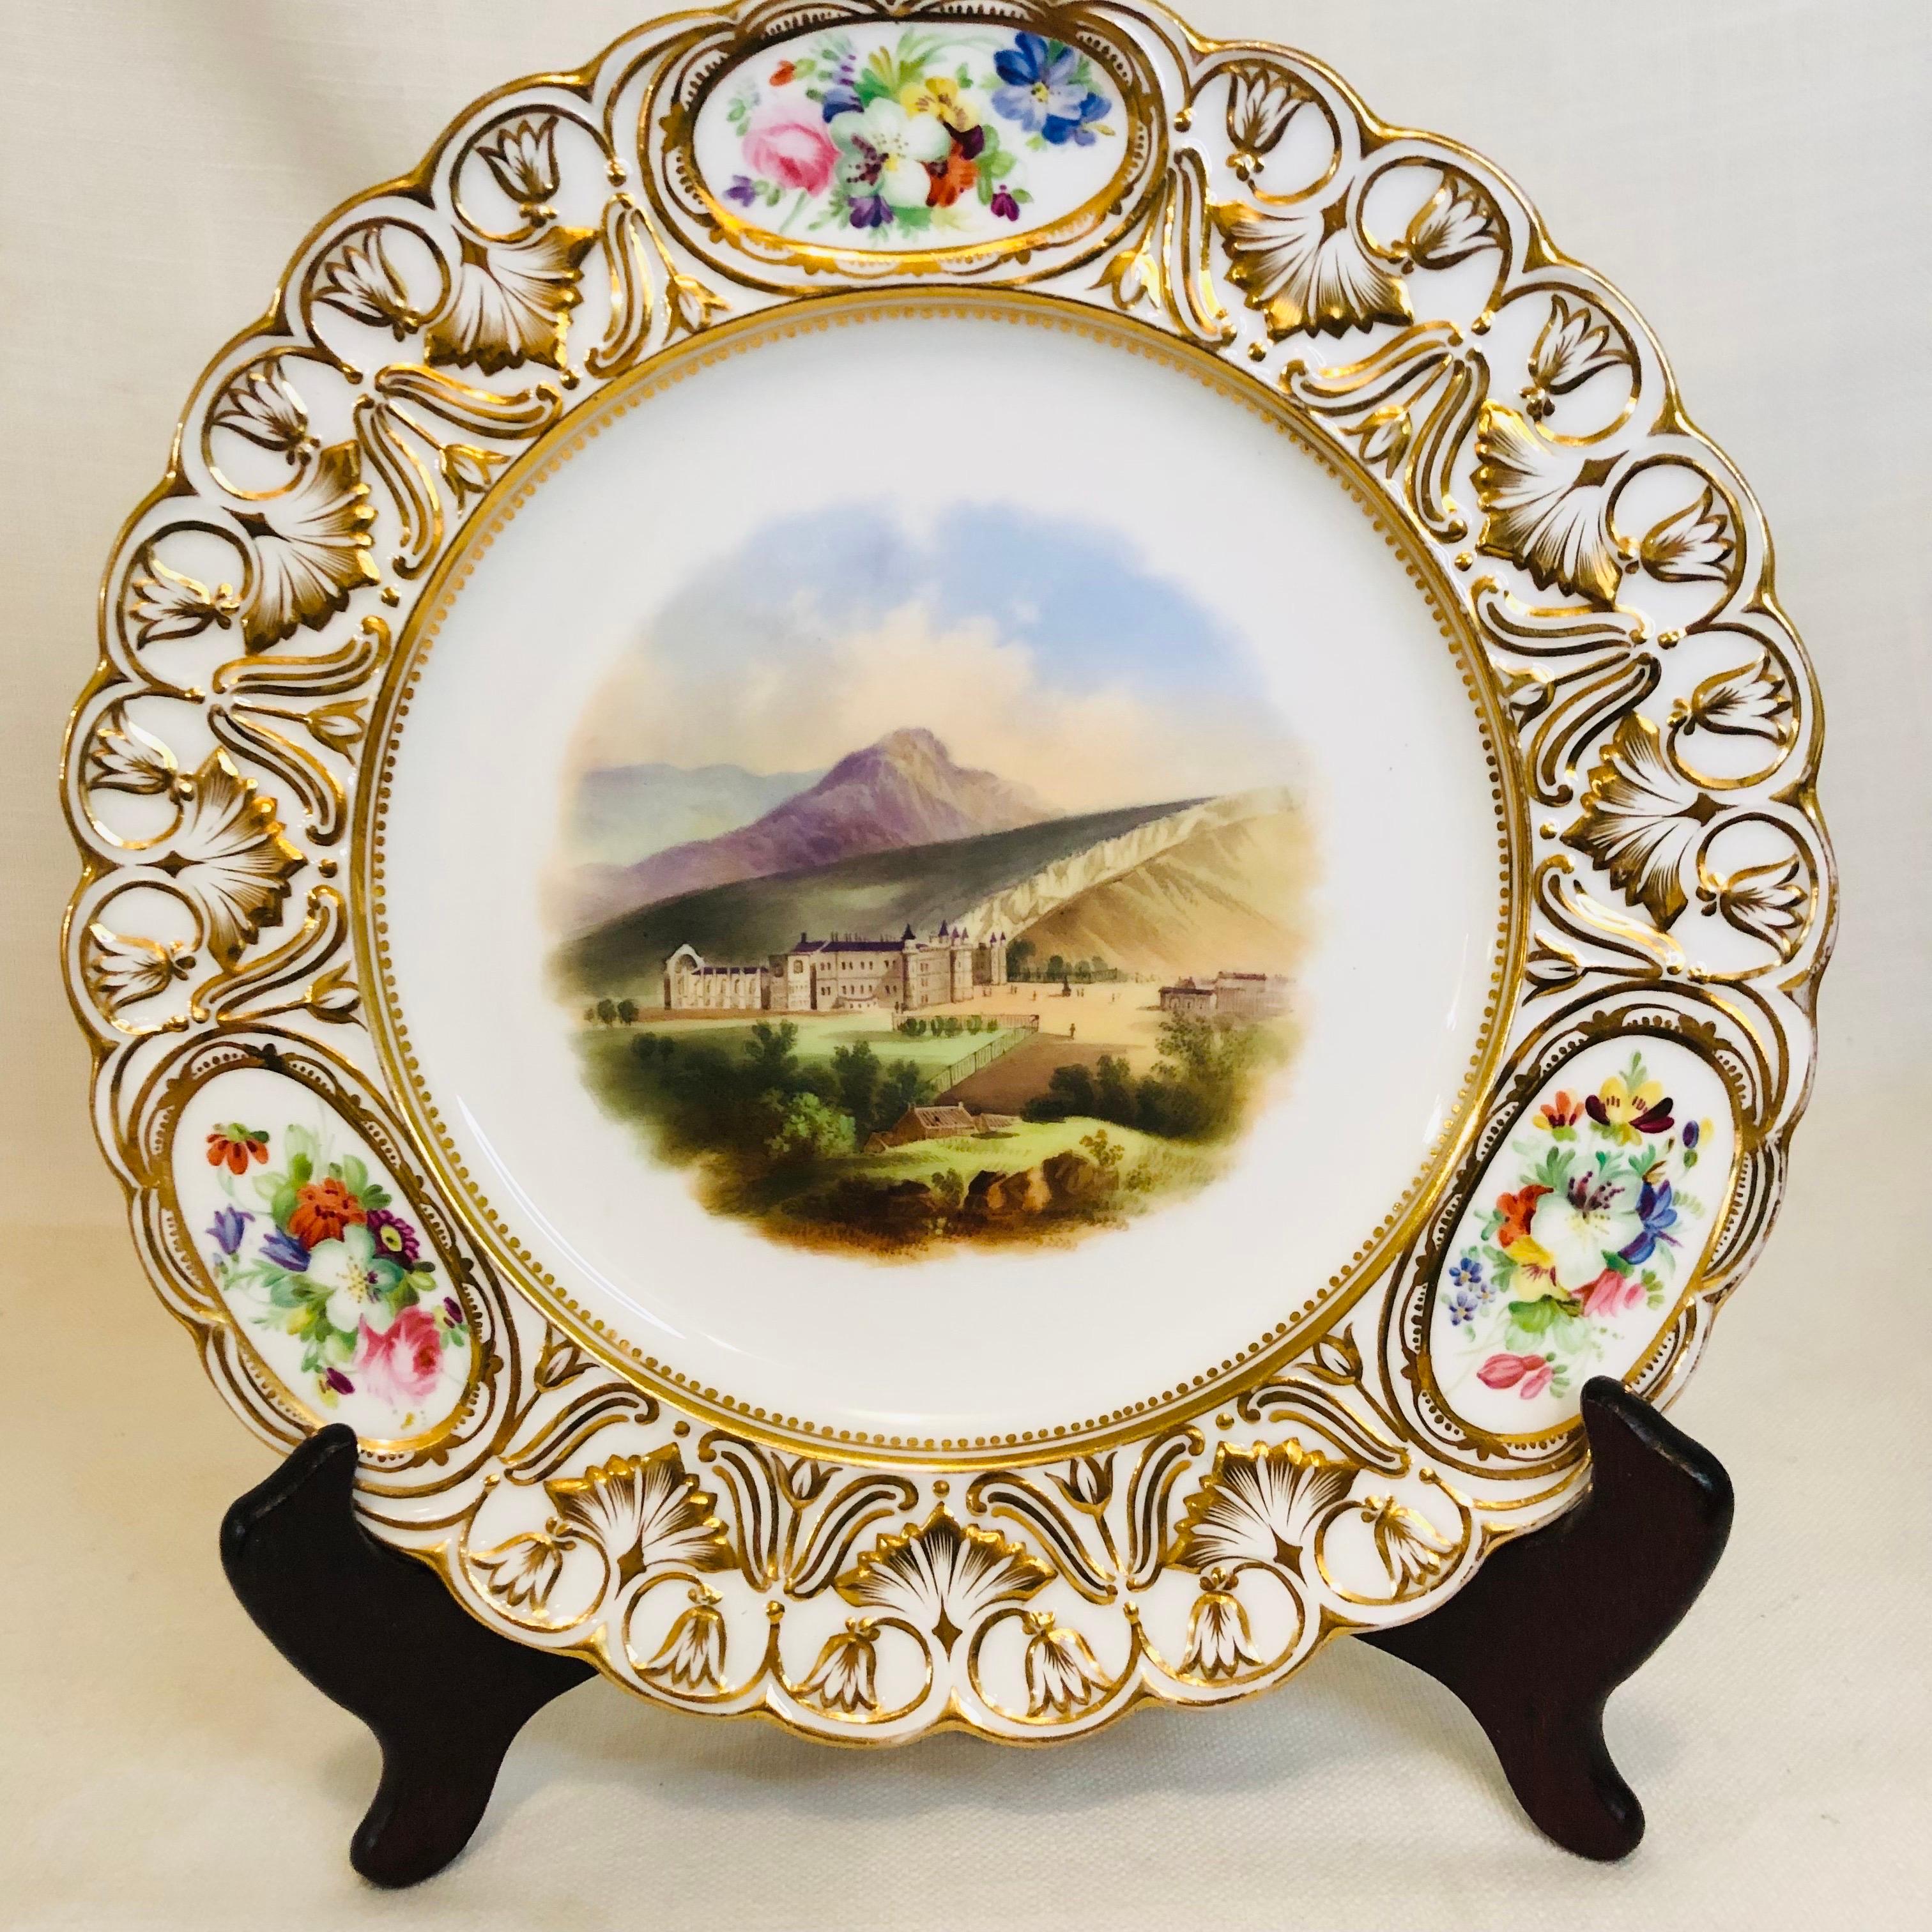 Set of 16 19th Century Coalport Plates Each Hand-Painted with Magnificent Scenes For Sale 11